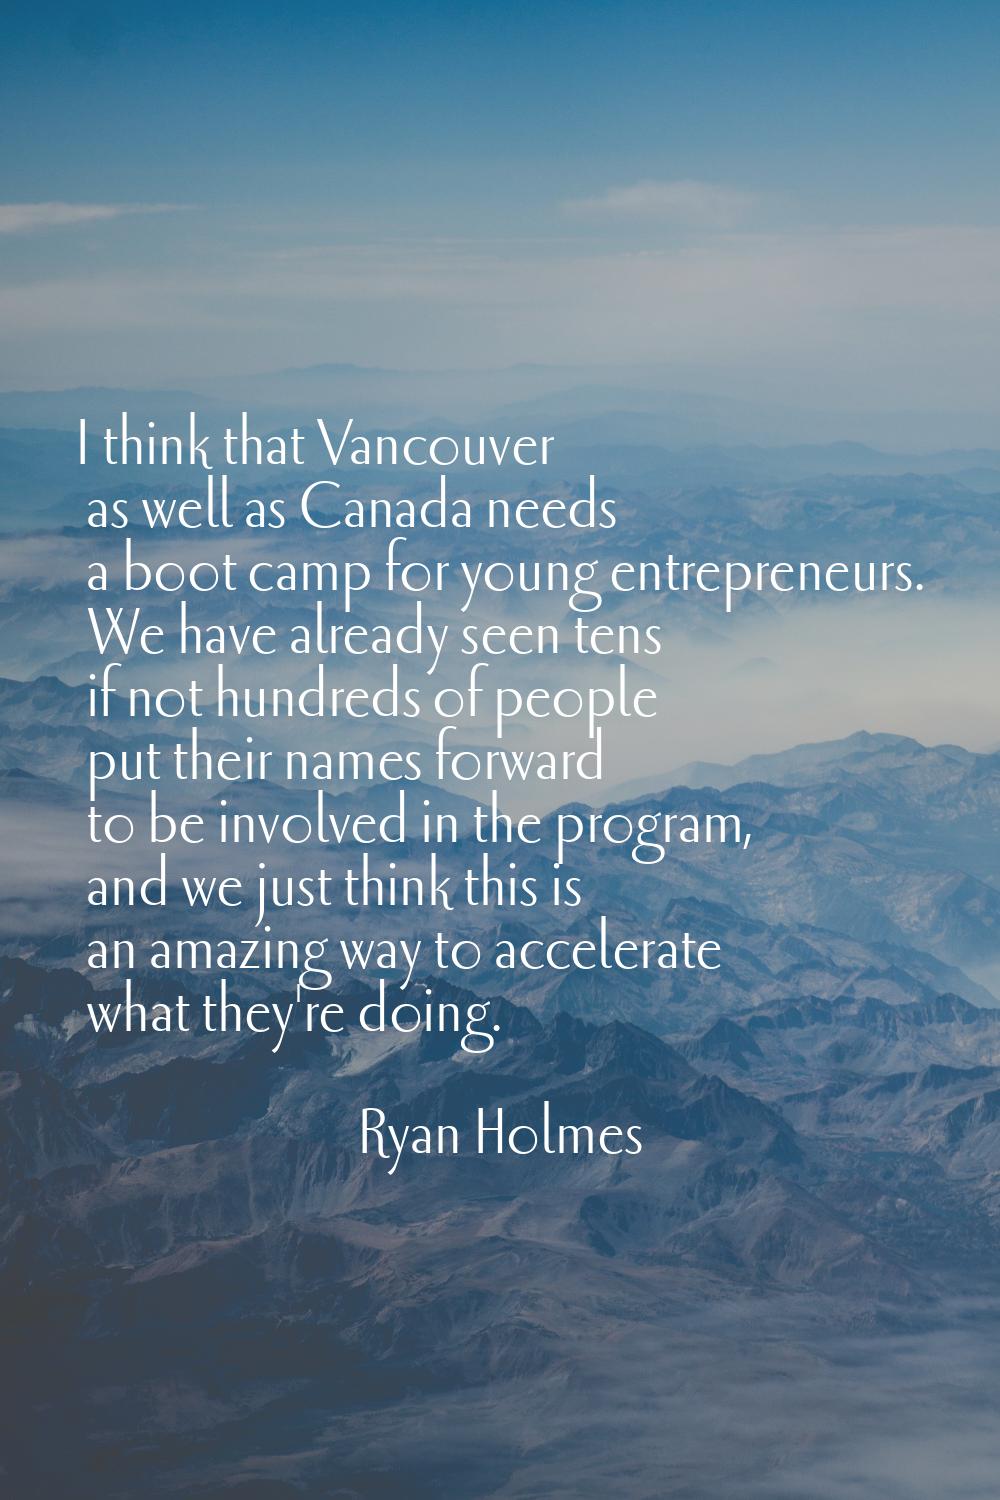 I think that Vancouver as well as Canada needs a boot camp for young entrepreneurs. We have already